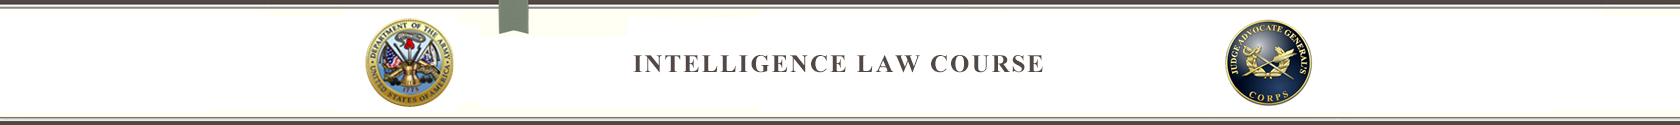 Intelligence Law Course Banner